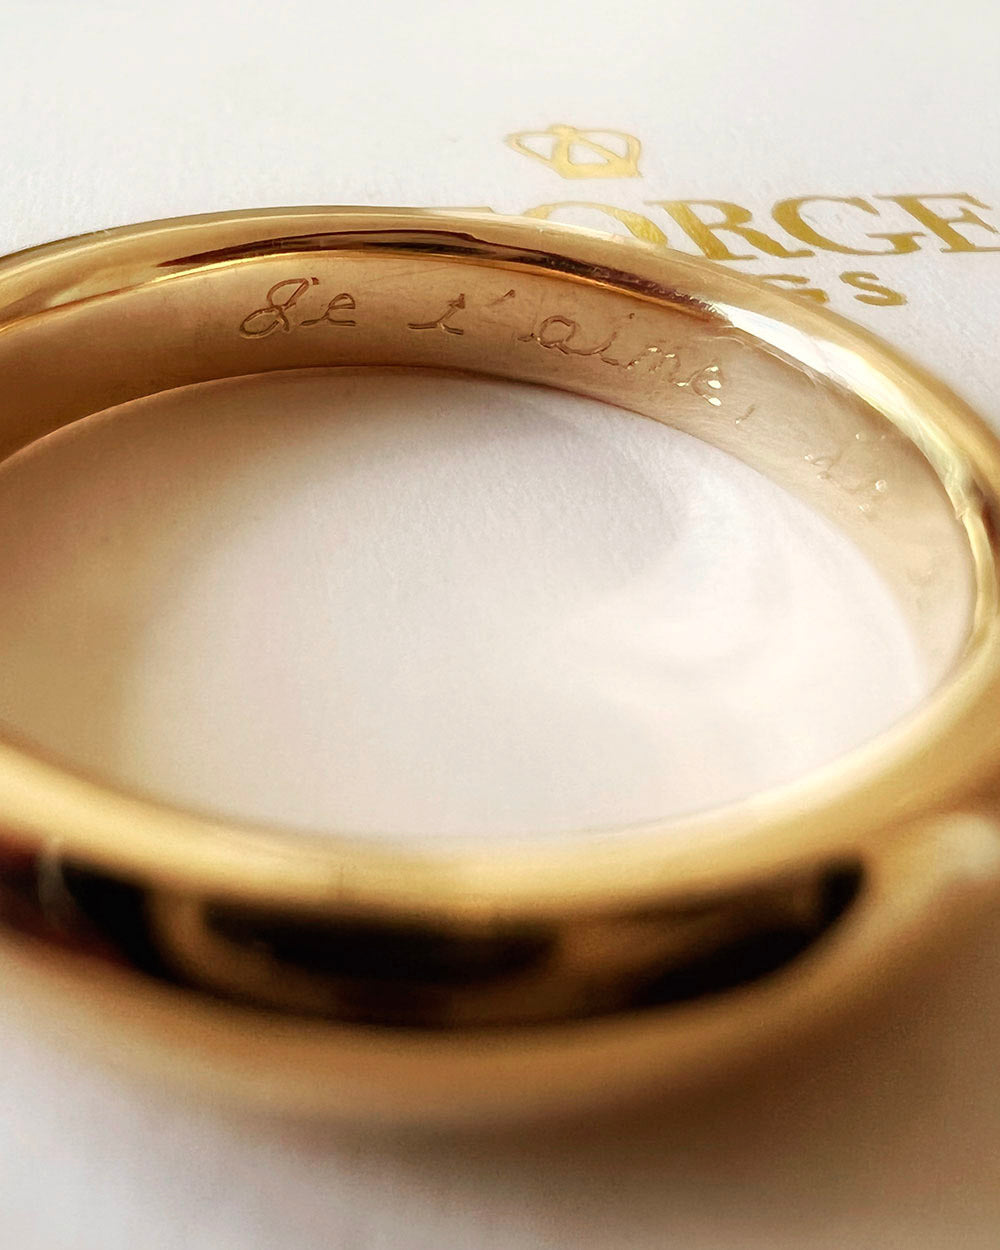 engraving script inside of gold wedding band by George Rings script font block font hand engraving